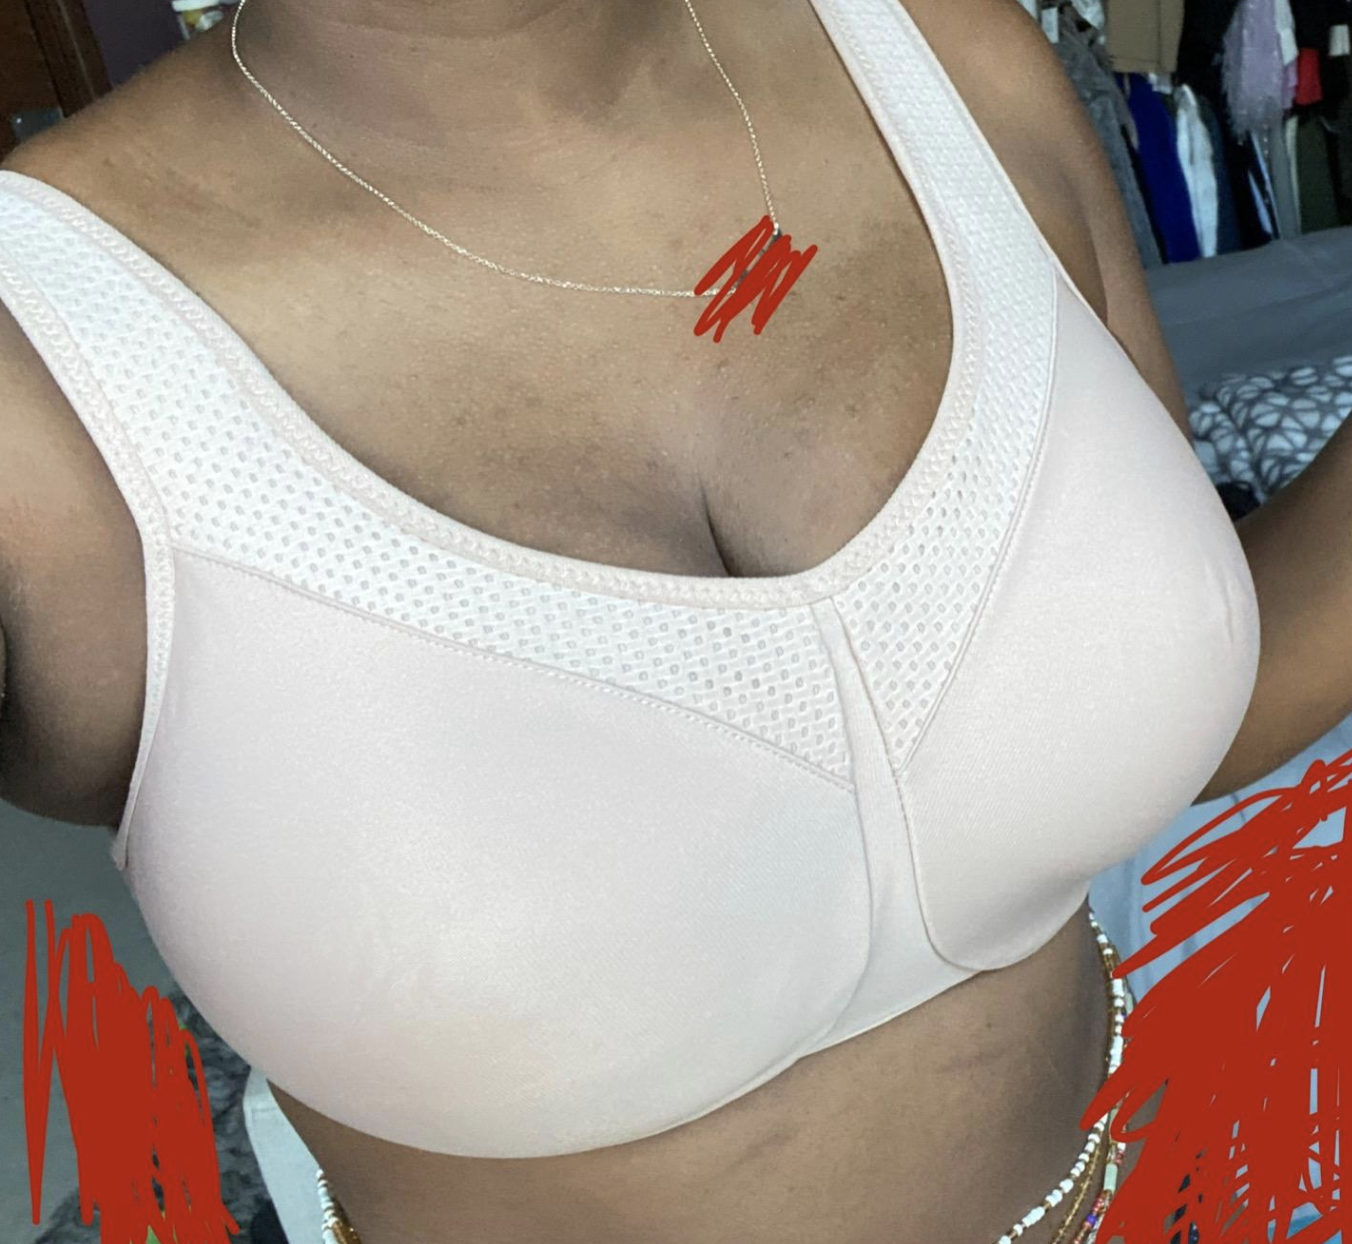 reviewer wearing the nude sports bra